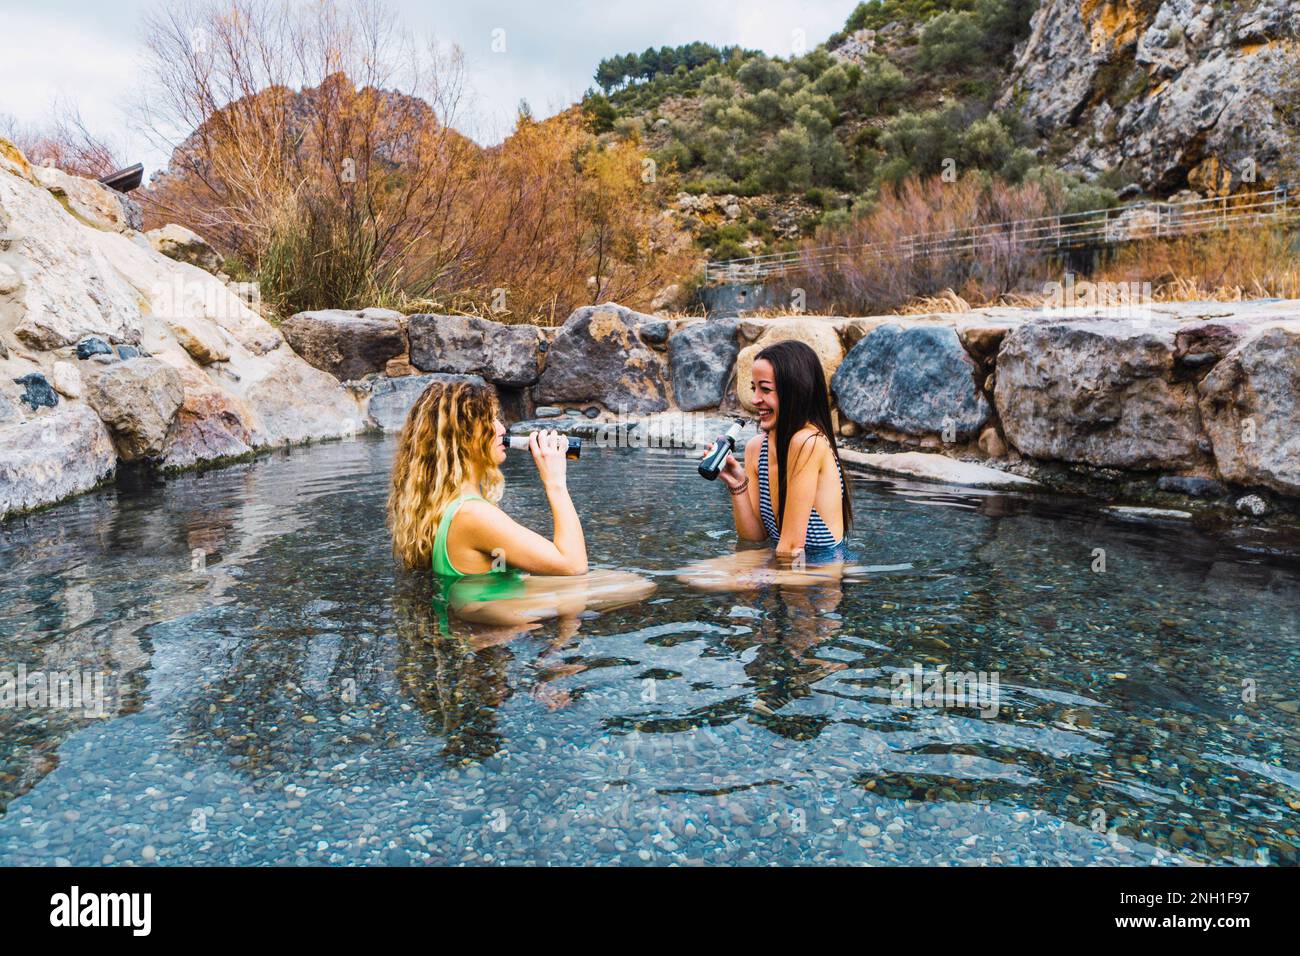 two people relaxing in natural hot springs drinking beer Stock Photo